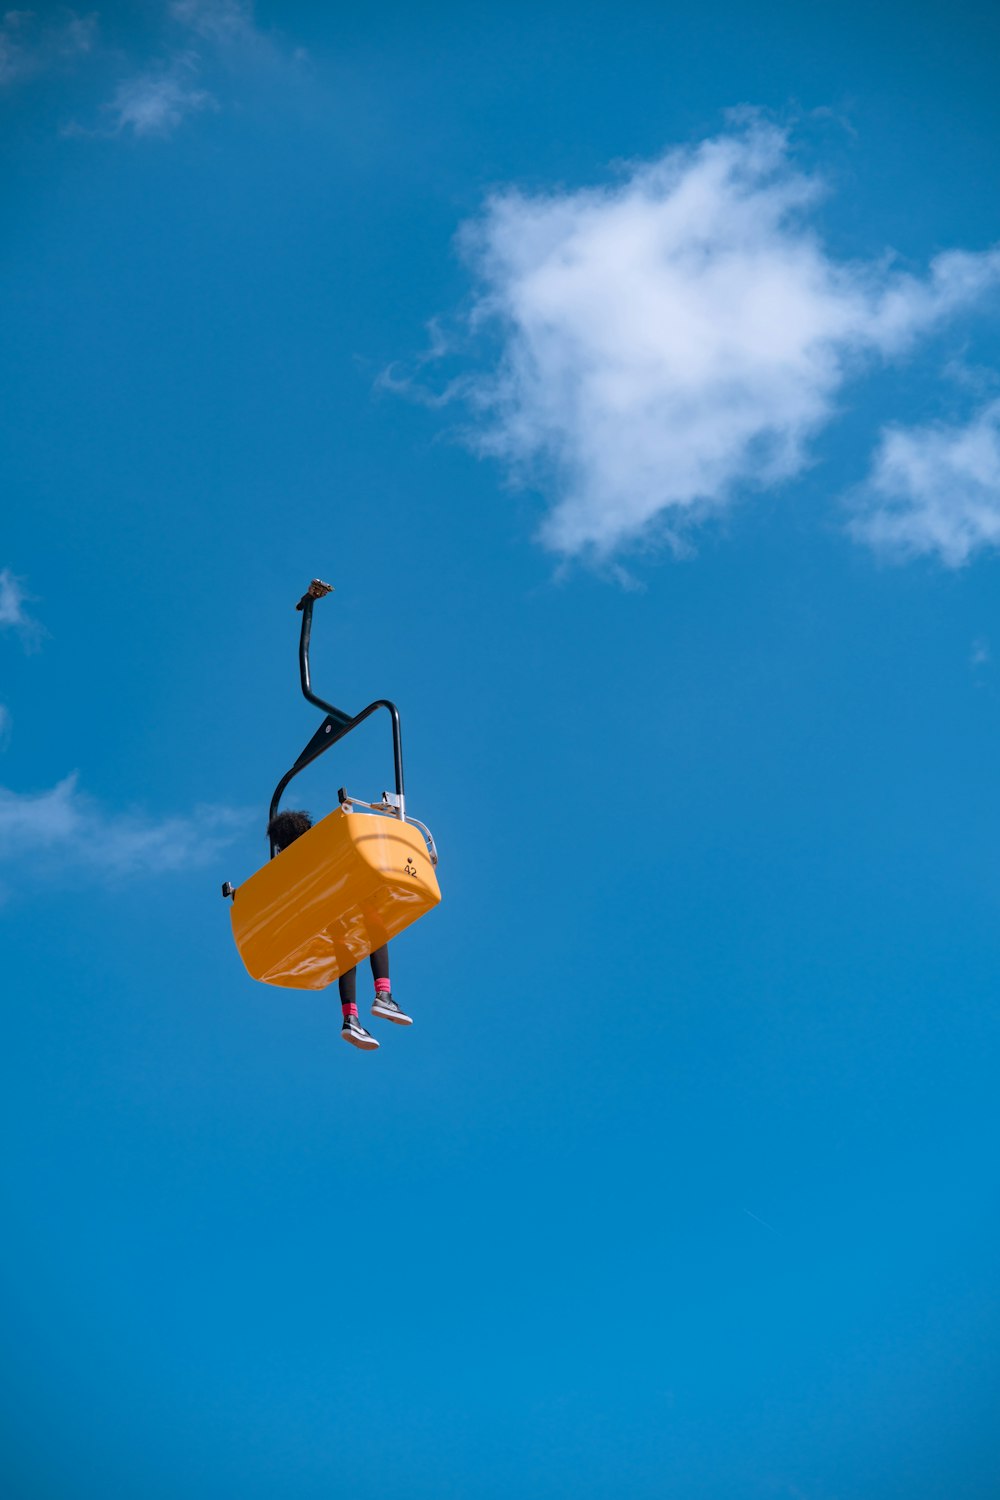 a person on a yellow chair in the air